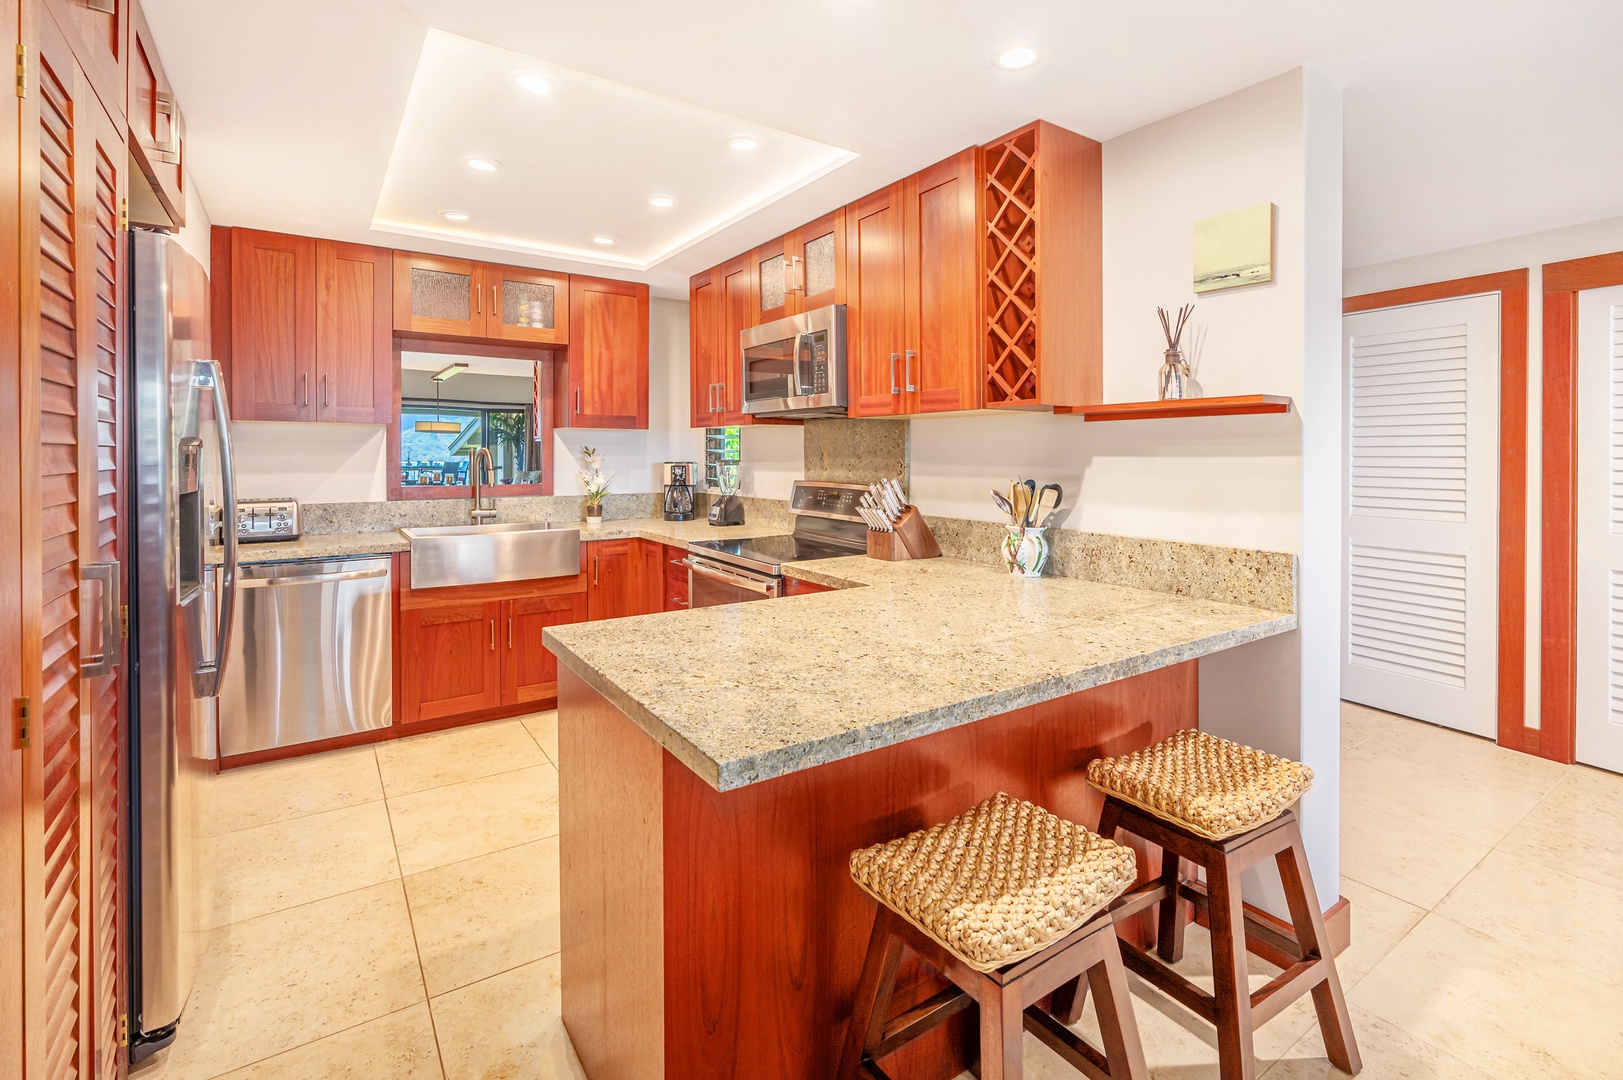 Princeville Vacation Rentals, Hanalei Bay Resort 7307/08 - Well equipped kitchen and bar